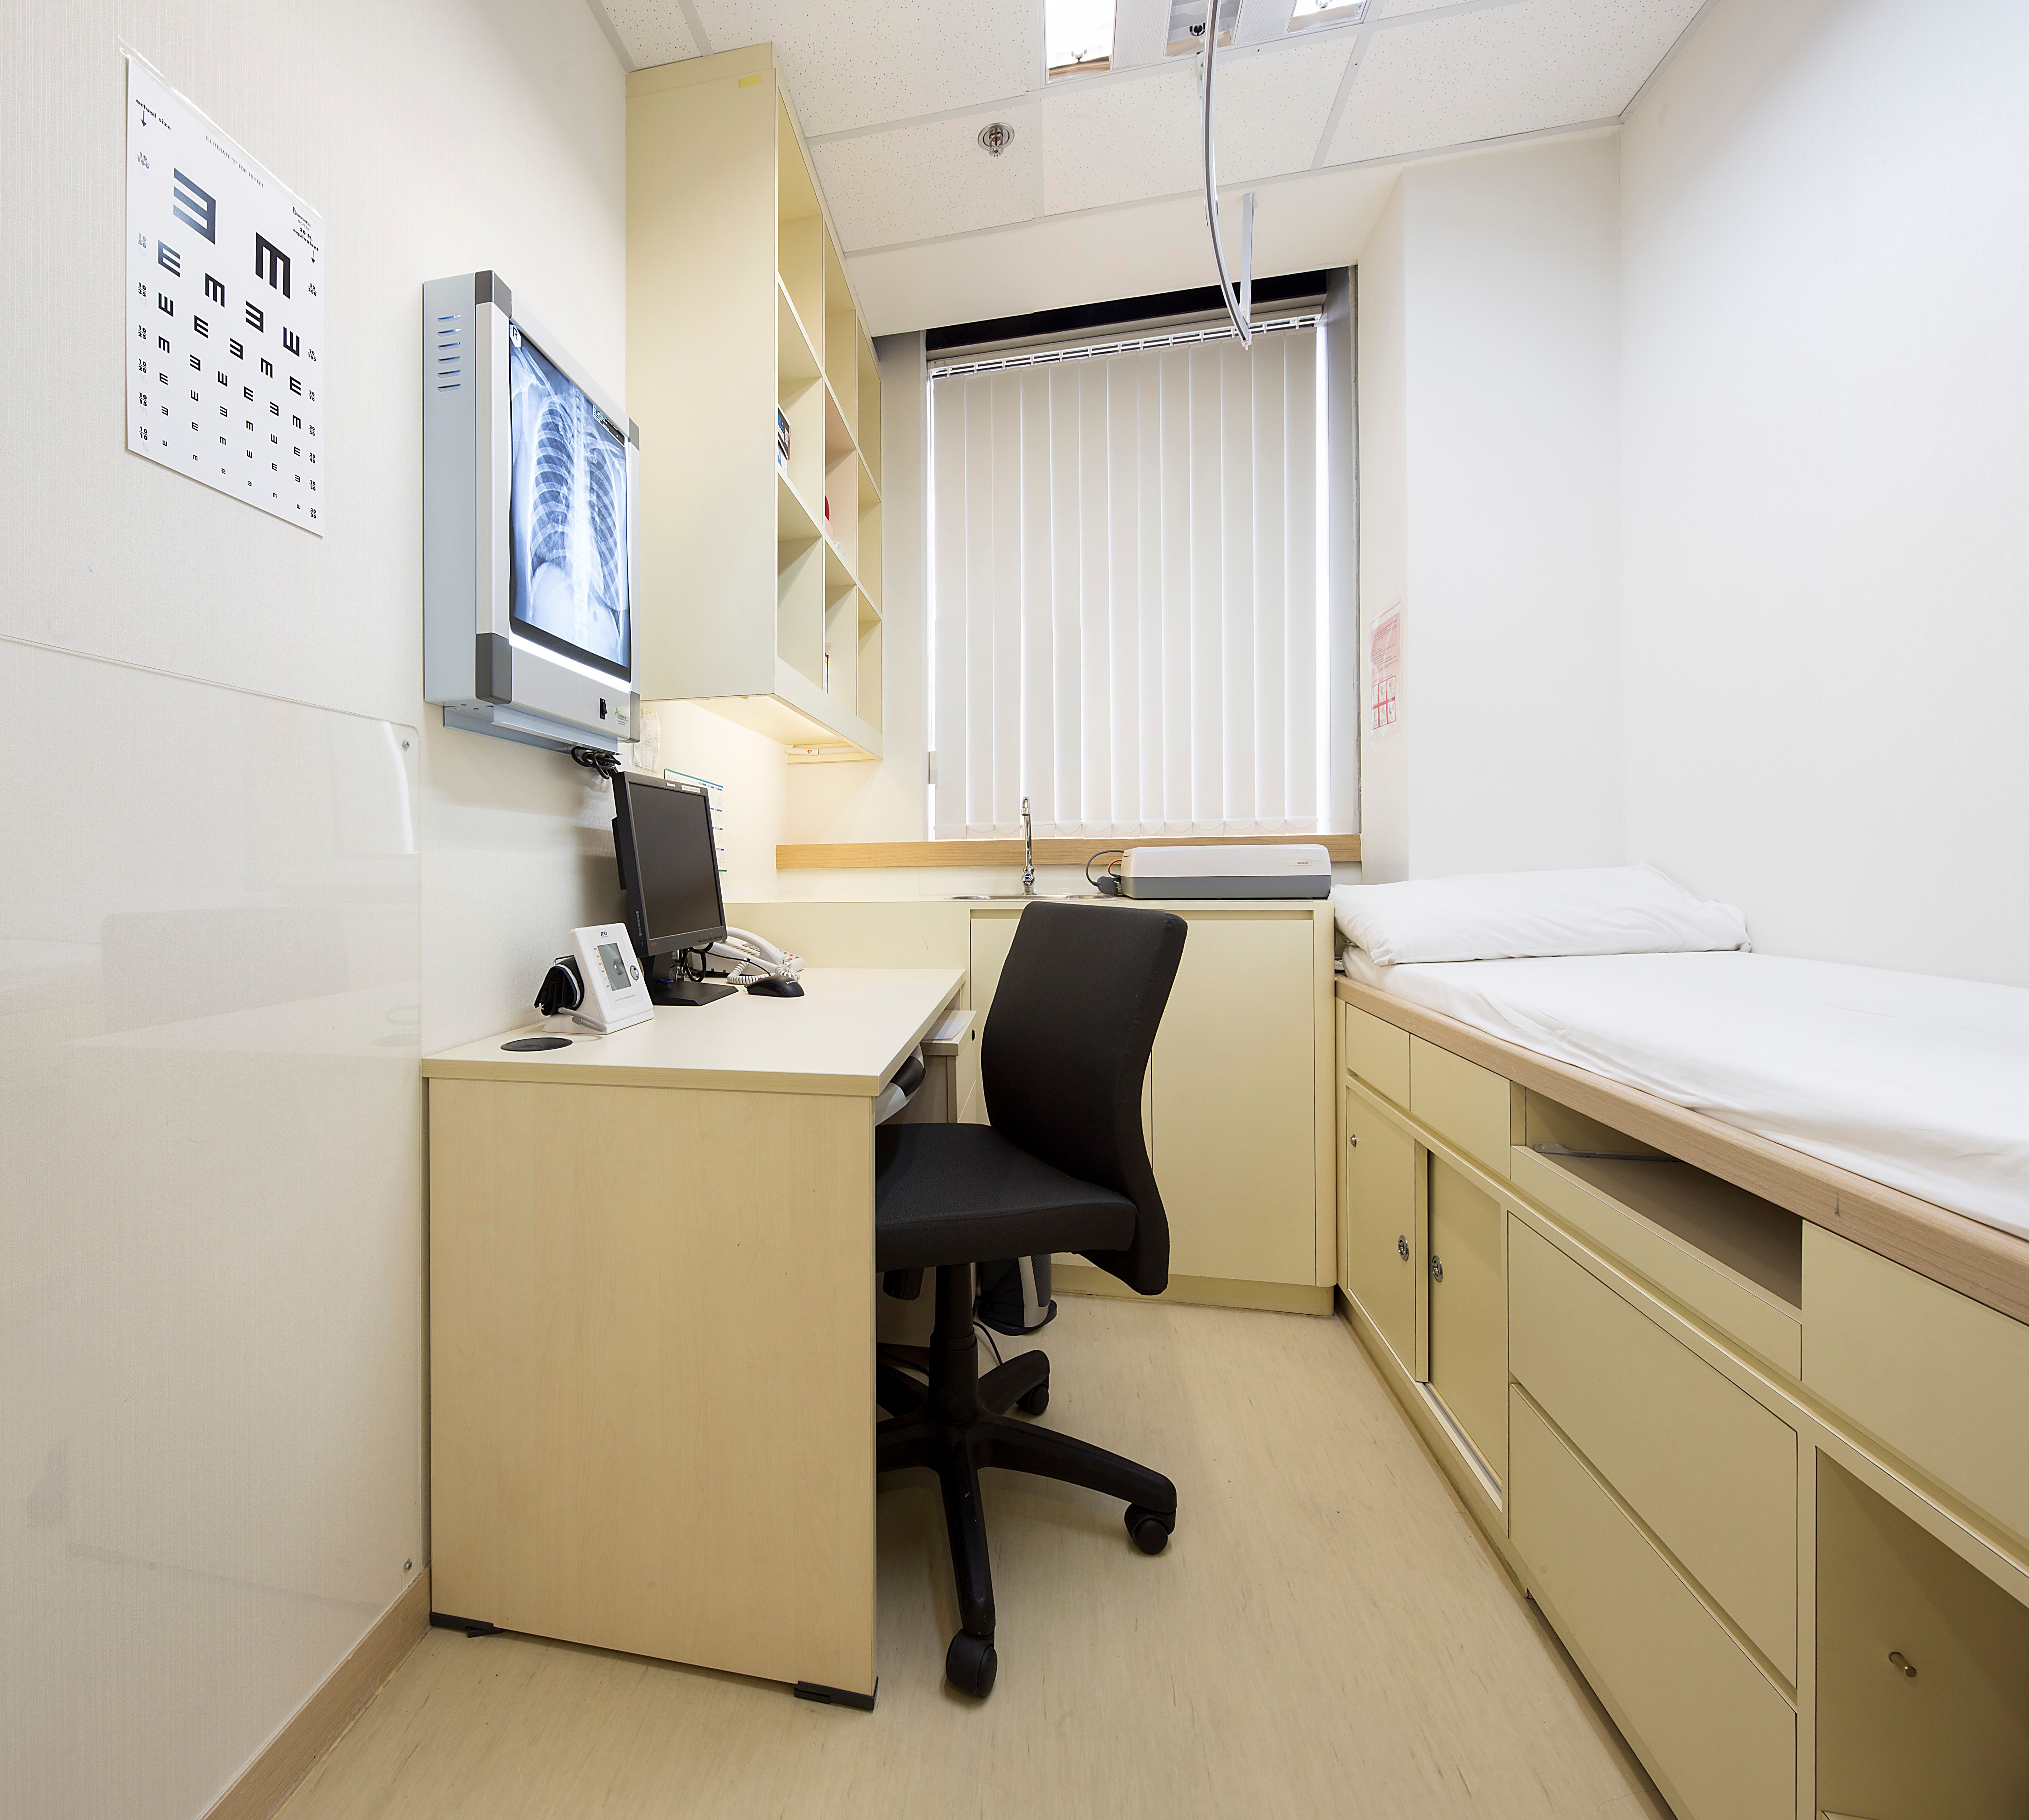 Examination room with patient bed, desk, wall eye chart, chest X-ray